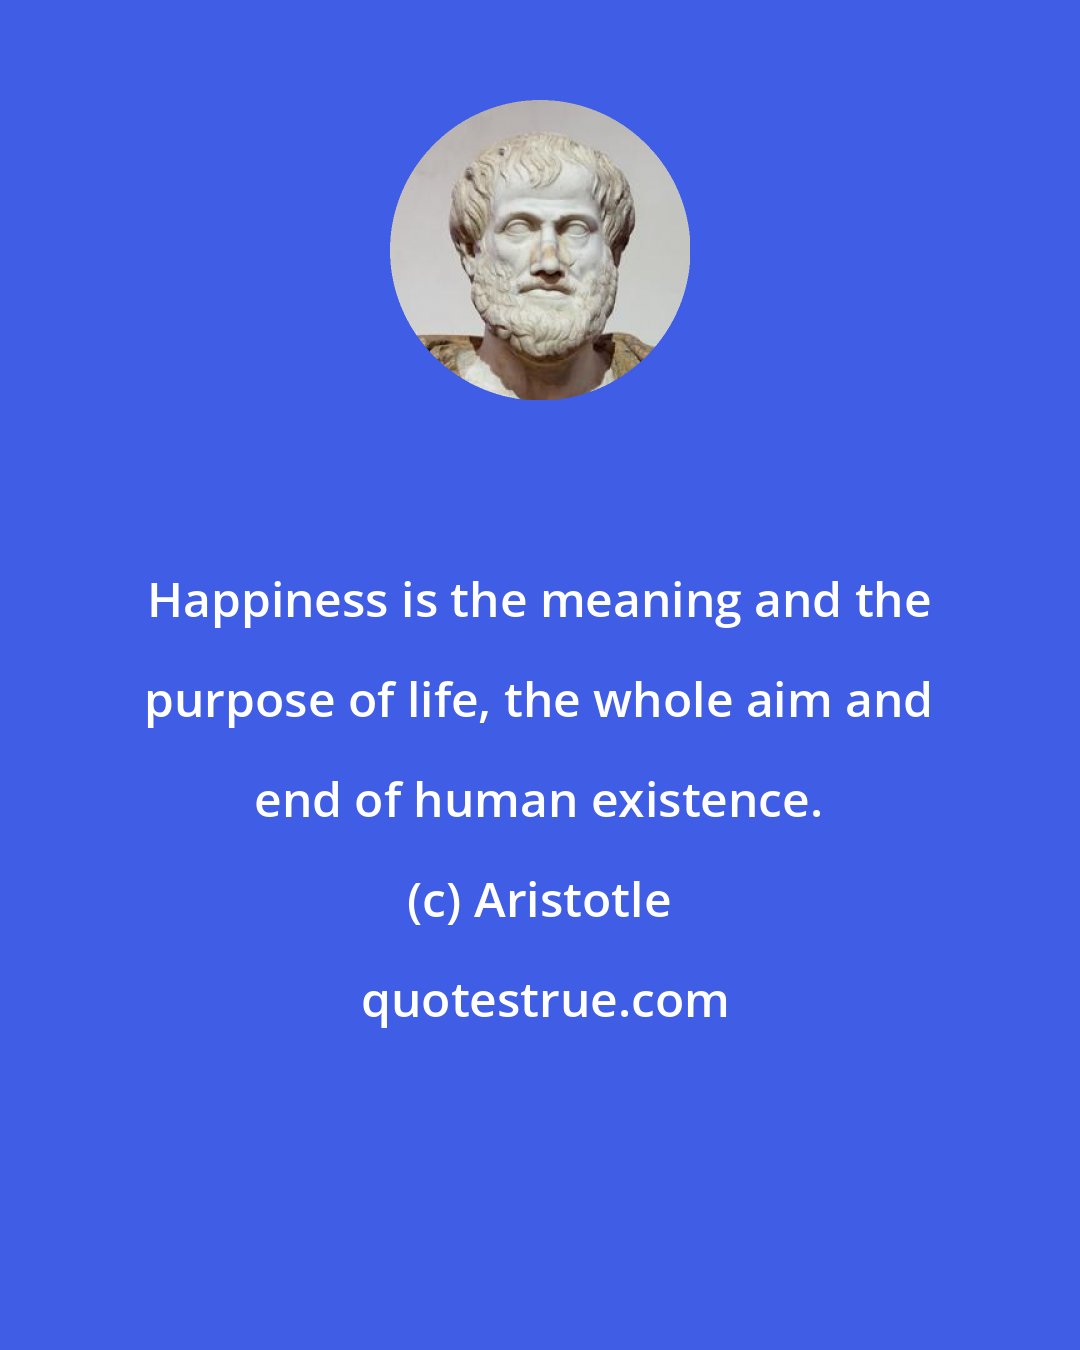 Aristotle: Happiness is the meaning and the purpose of life, the whole aim and end of human existence.